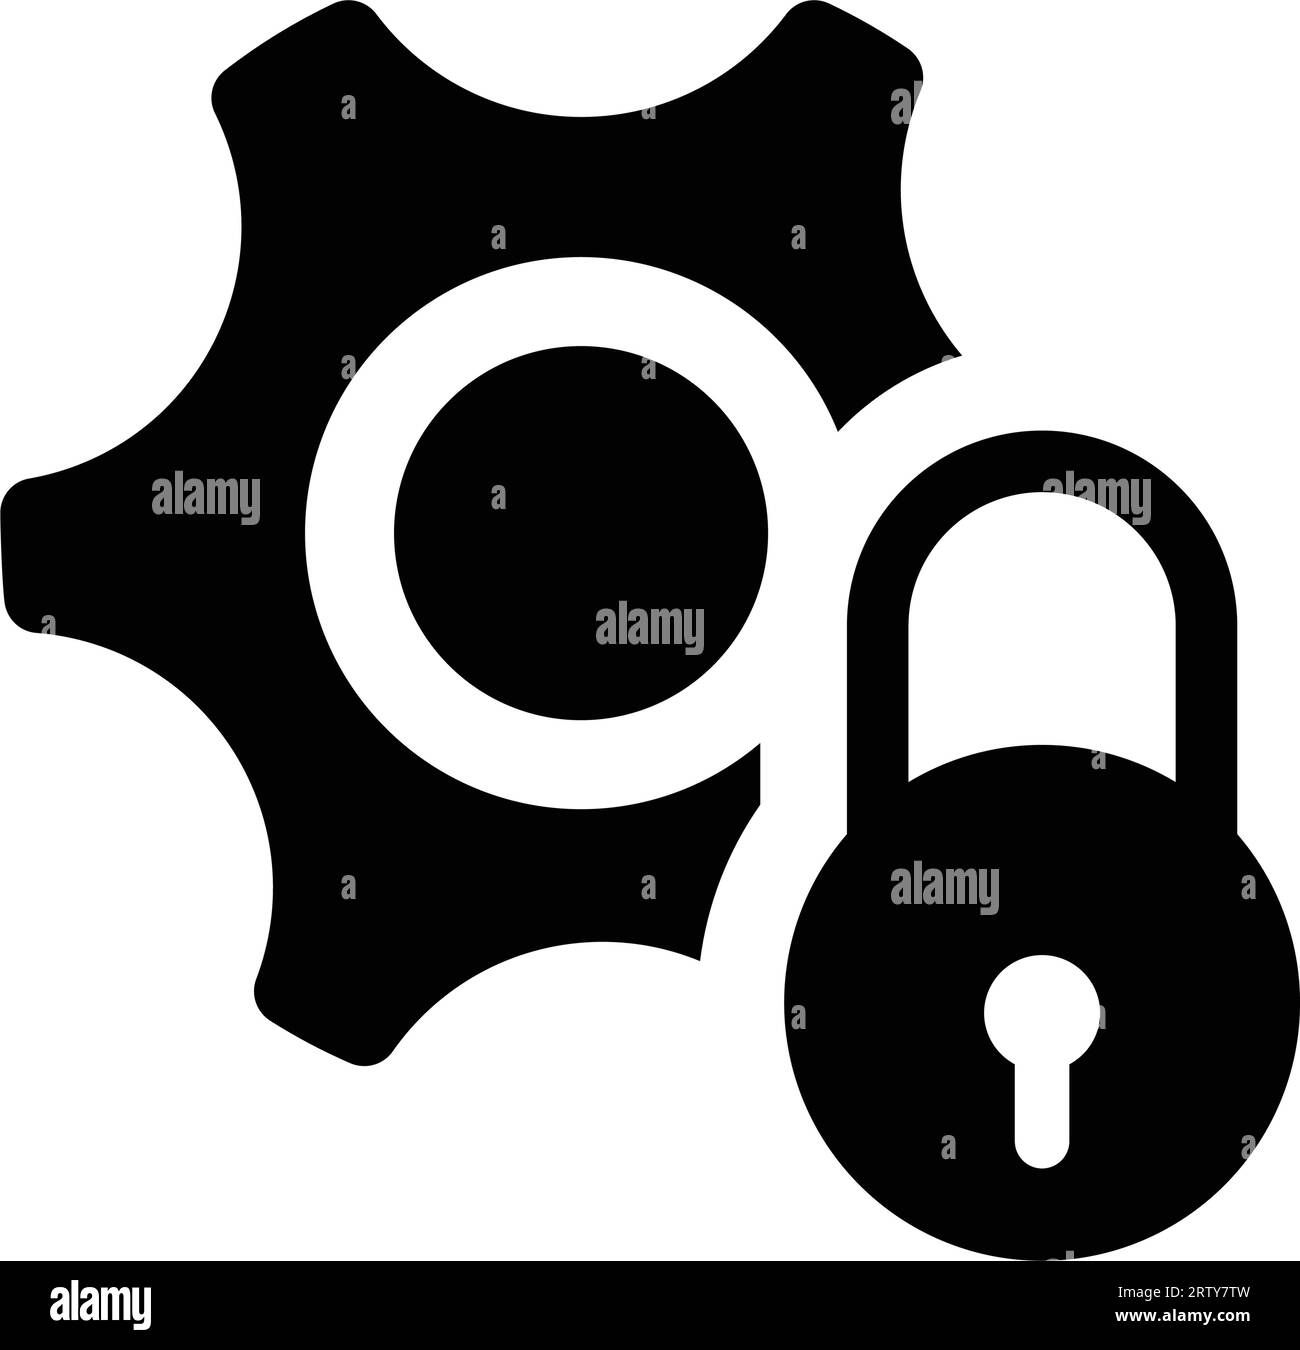 Lock Service icon. Simple vector illustration for web, print files, graphic or commercial purposes. Stock Vector